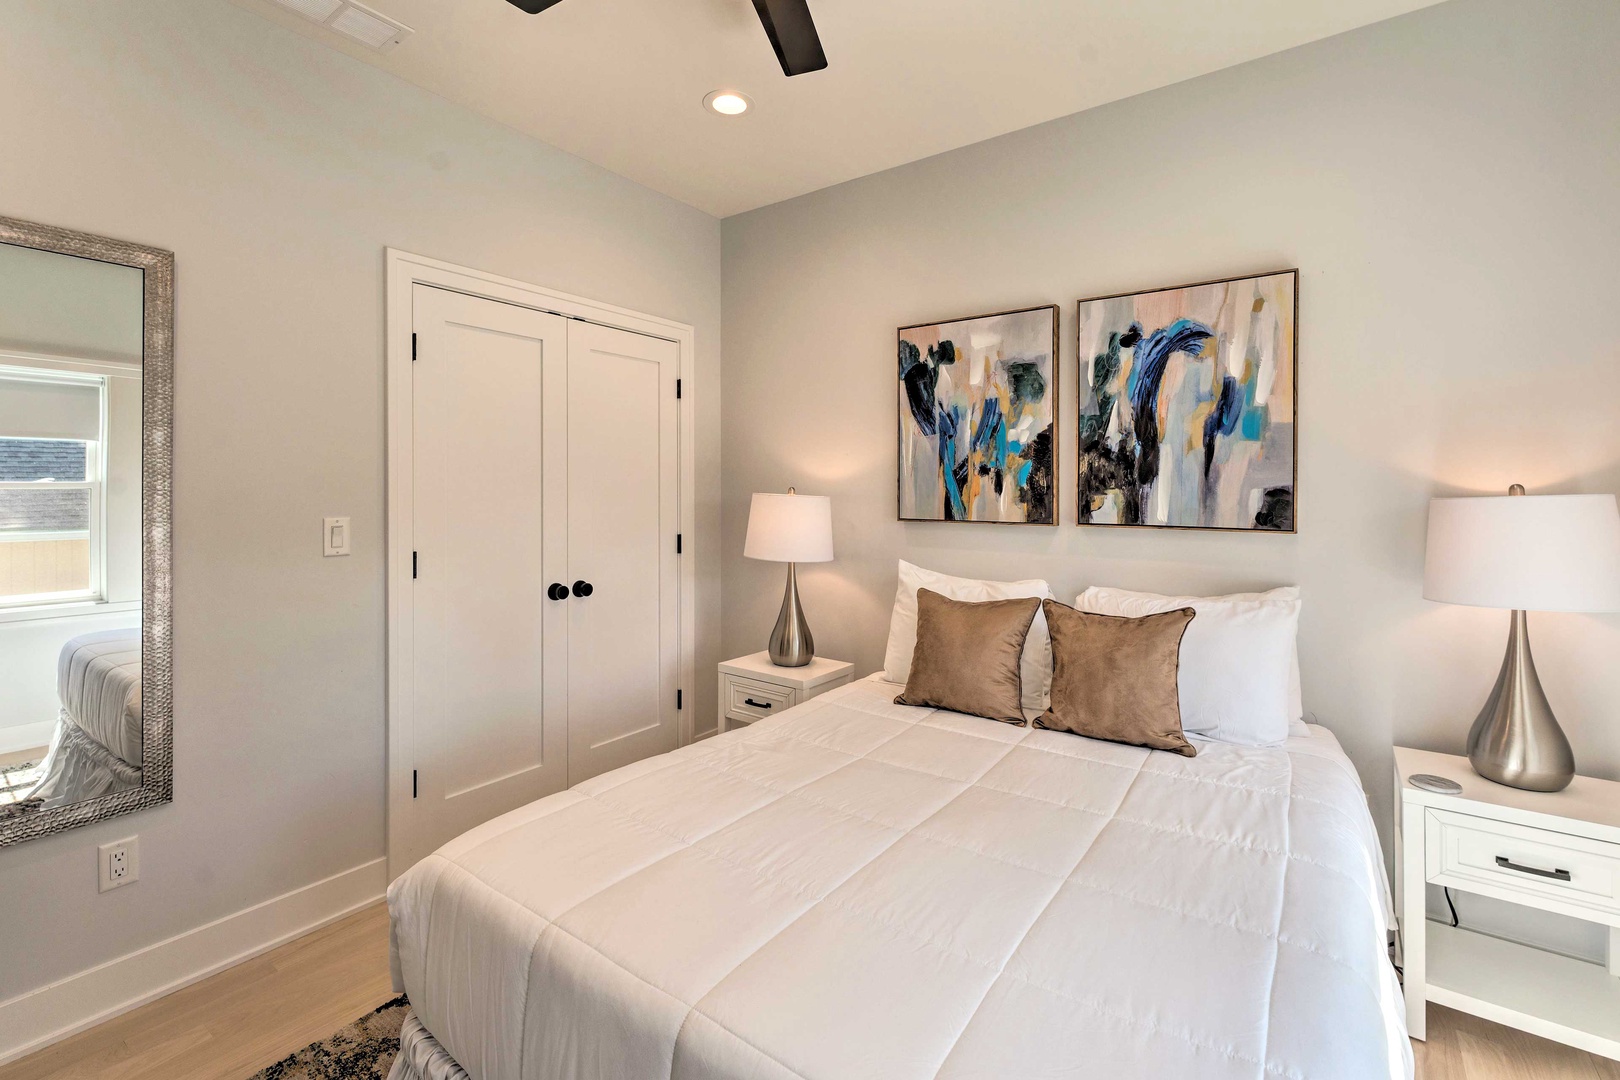 The third bedroom offers a plush queen-sized bed & Smart TV